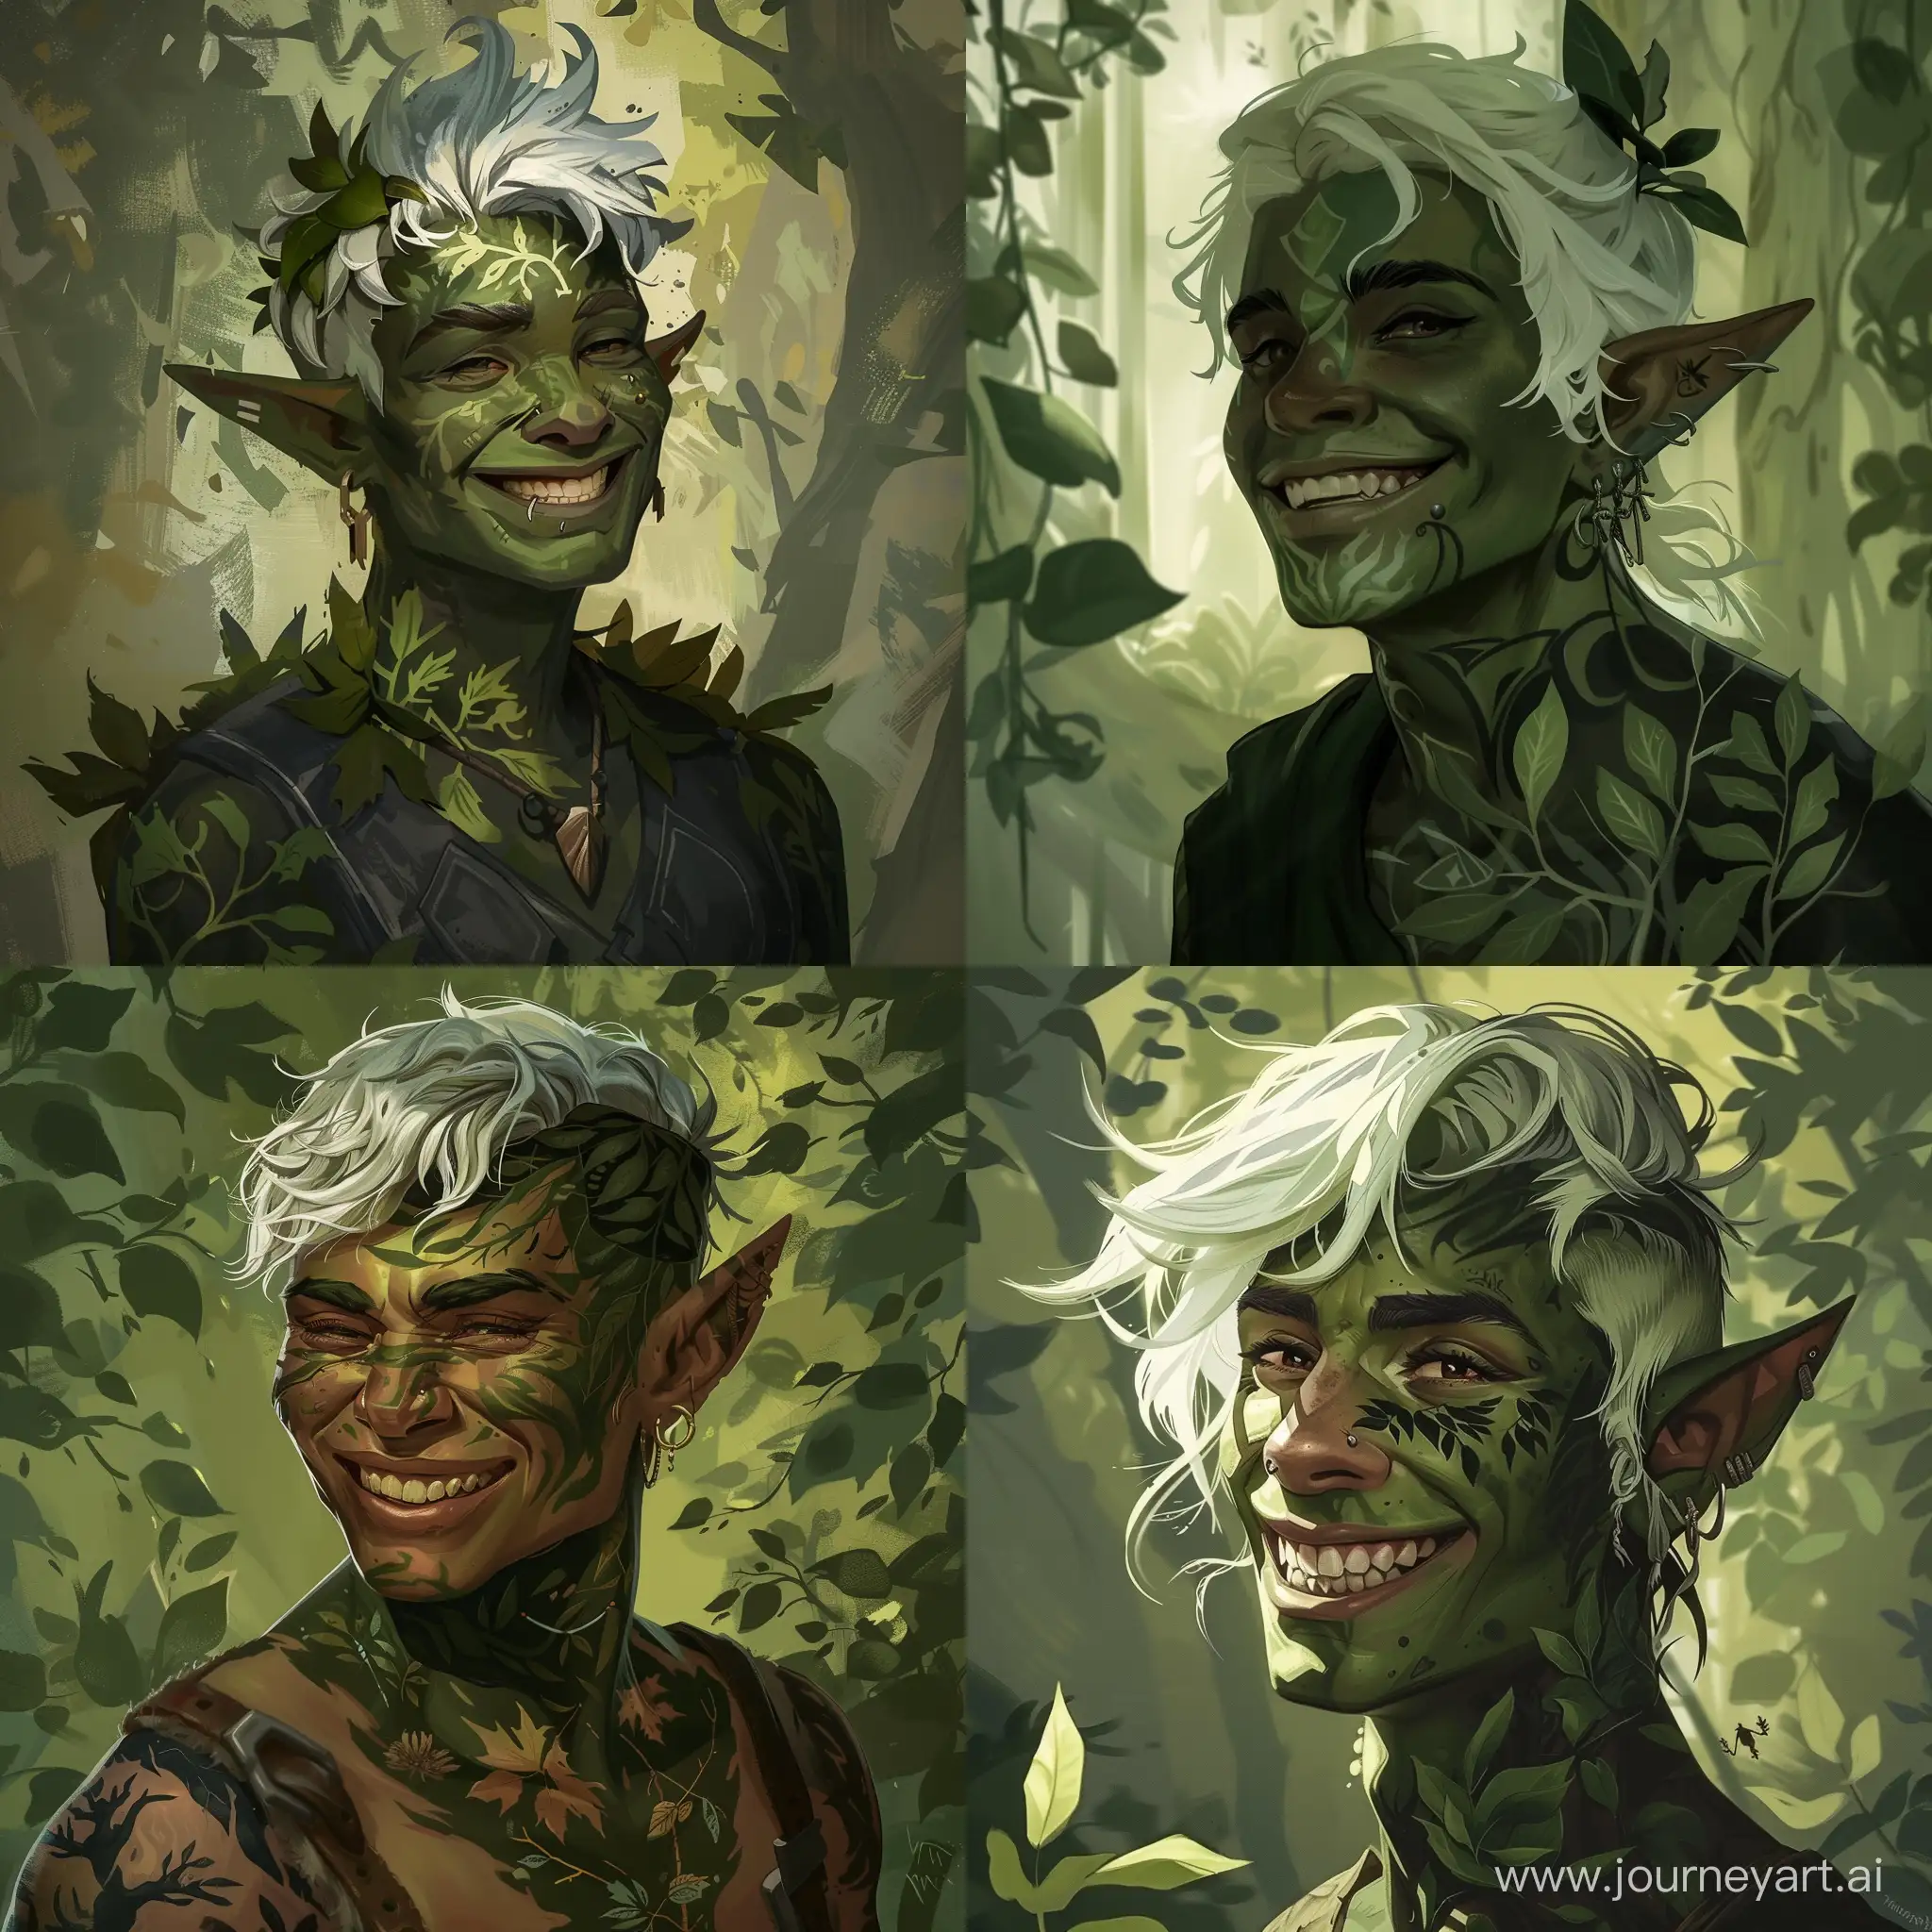 a smiling, neutral-kind half-orc with kind facial features, dark green skin color, with tattoos of leaves and trees, with white green hair, about 40 years old